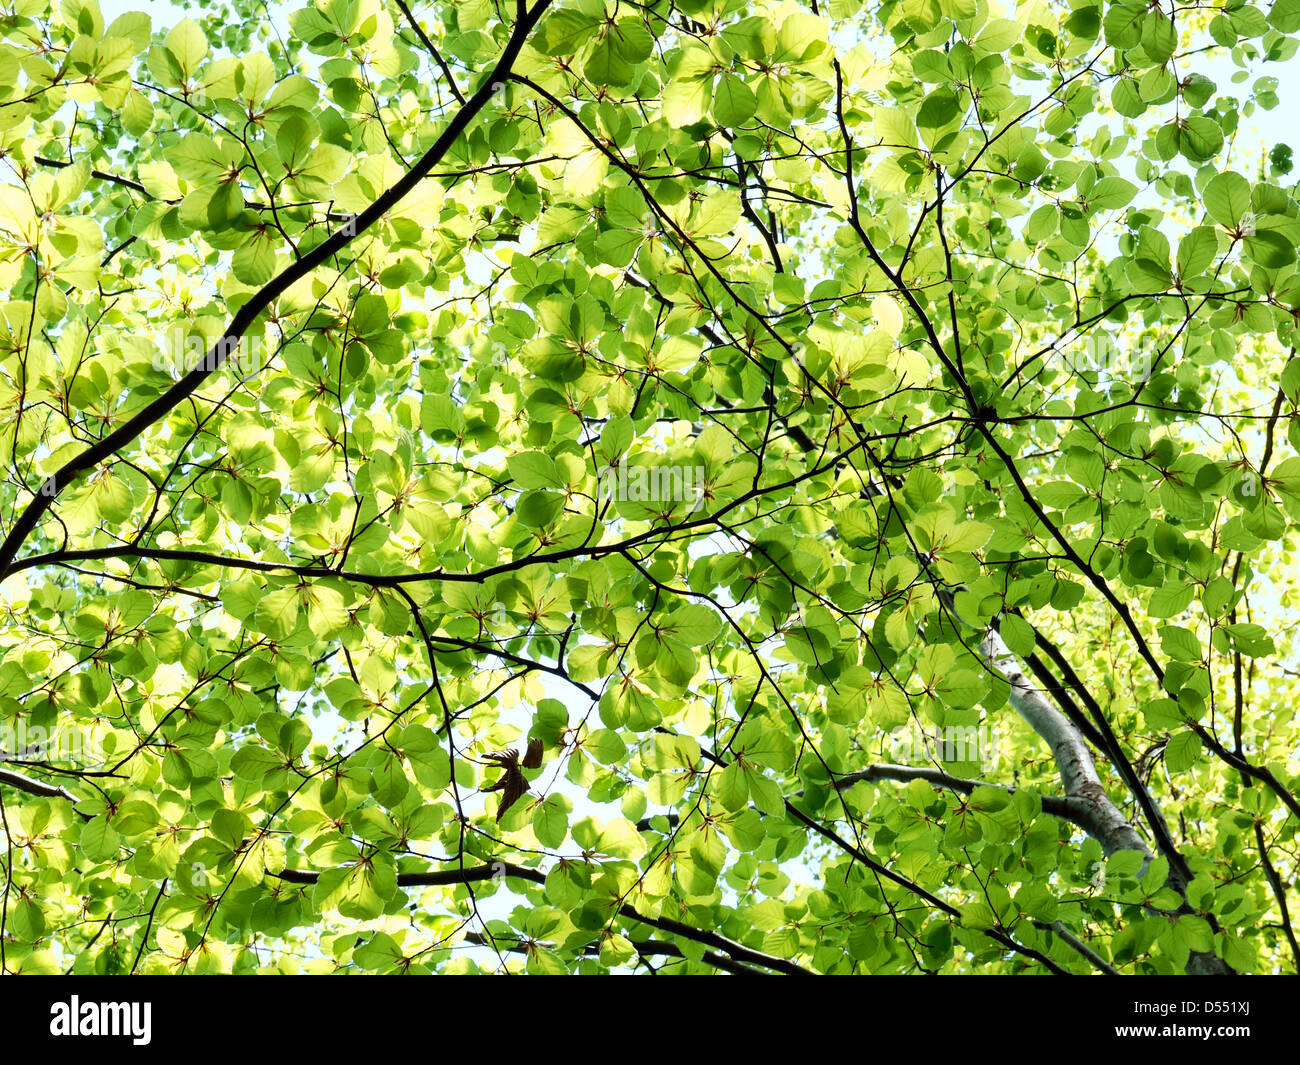 Tree foliage in fresh spring colors Stock Photo